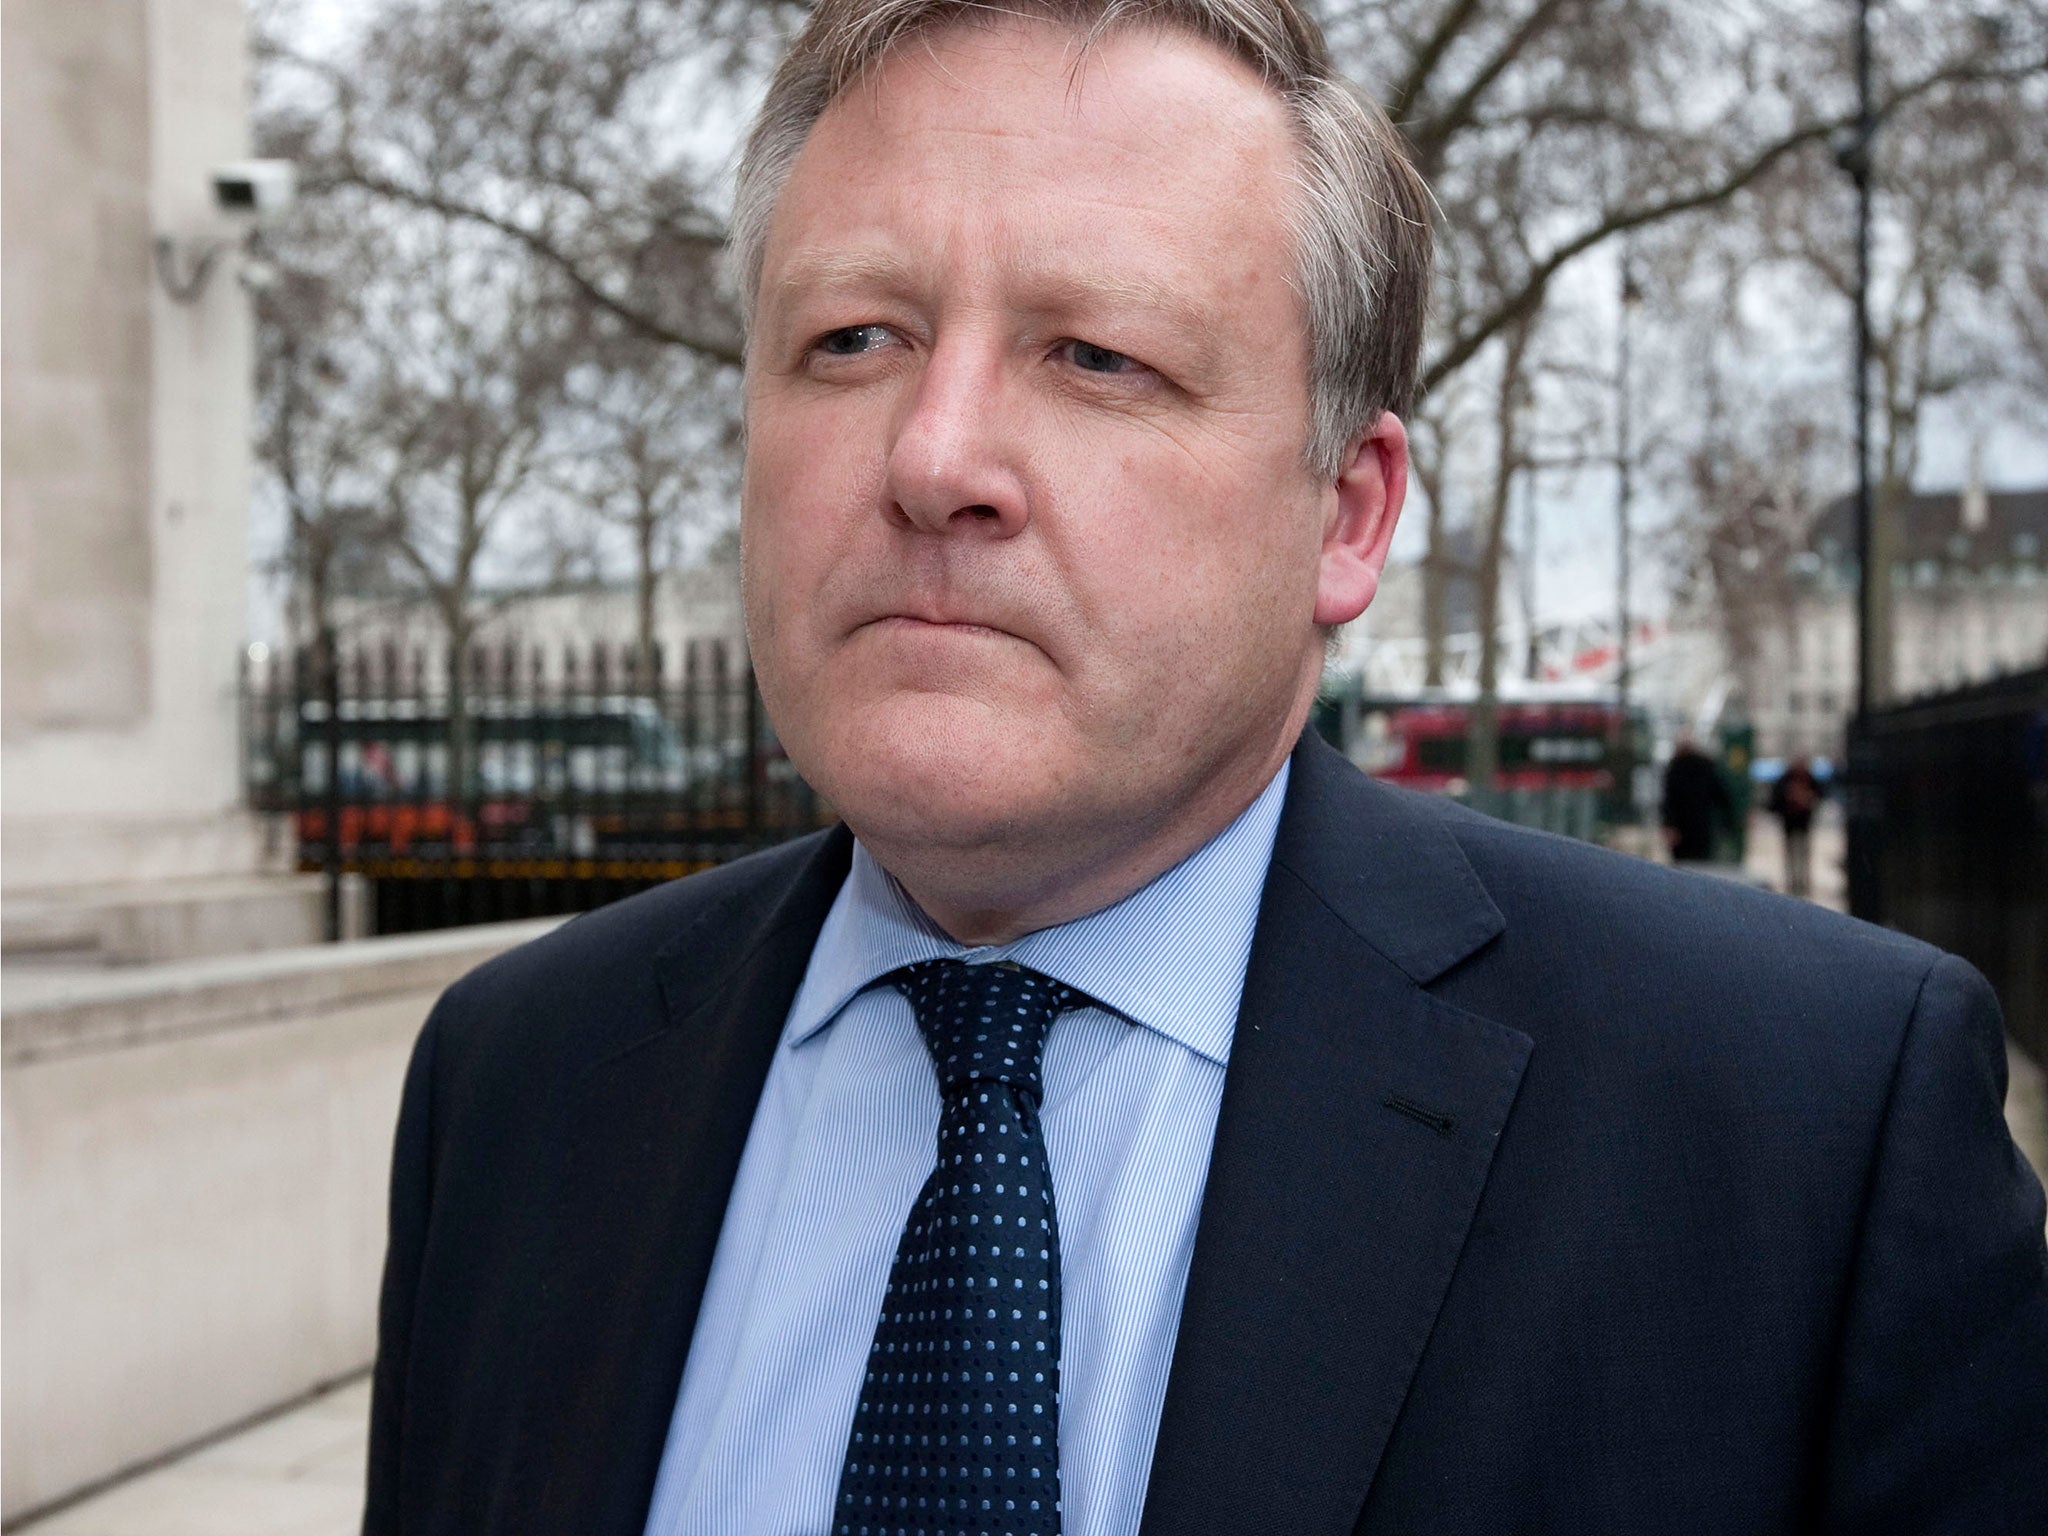 Kevan Jones, shadow Minister for Defence